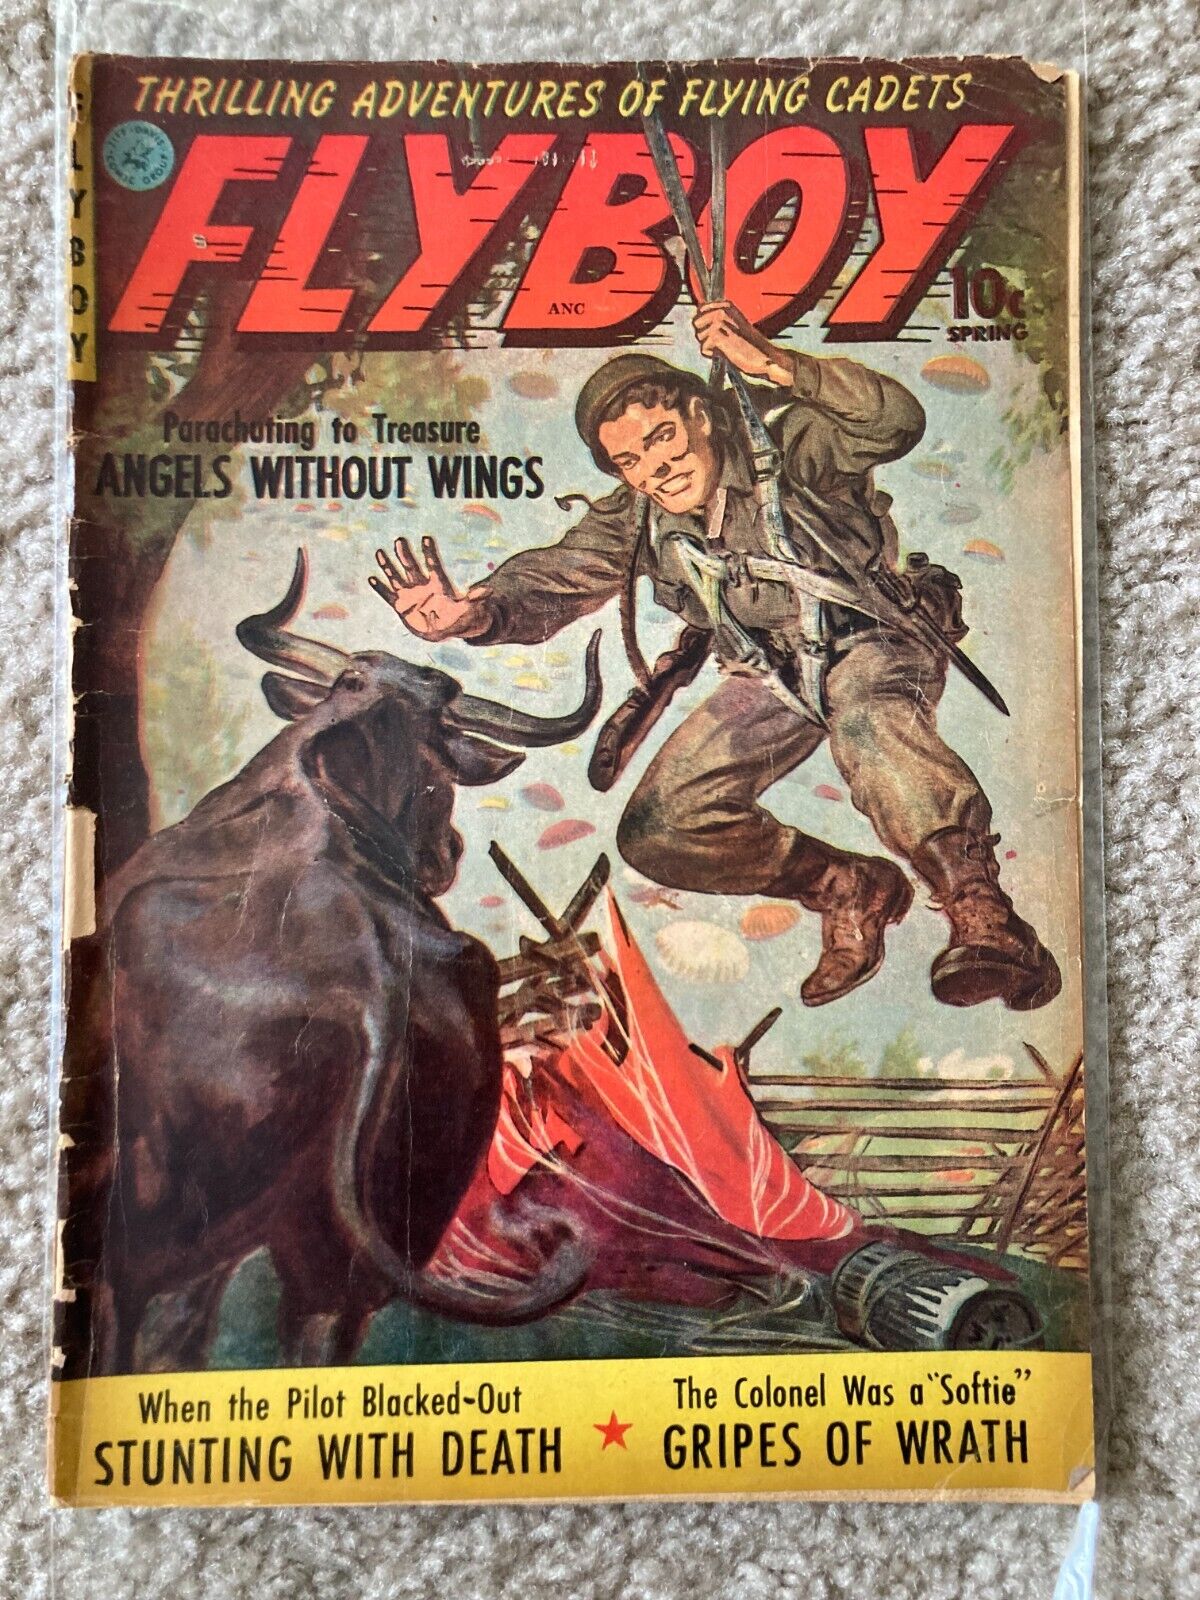 Comic Book Flyboy Vol 1 No 1 1952 Thrilling Adventures of Flying Cadets